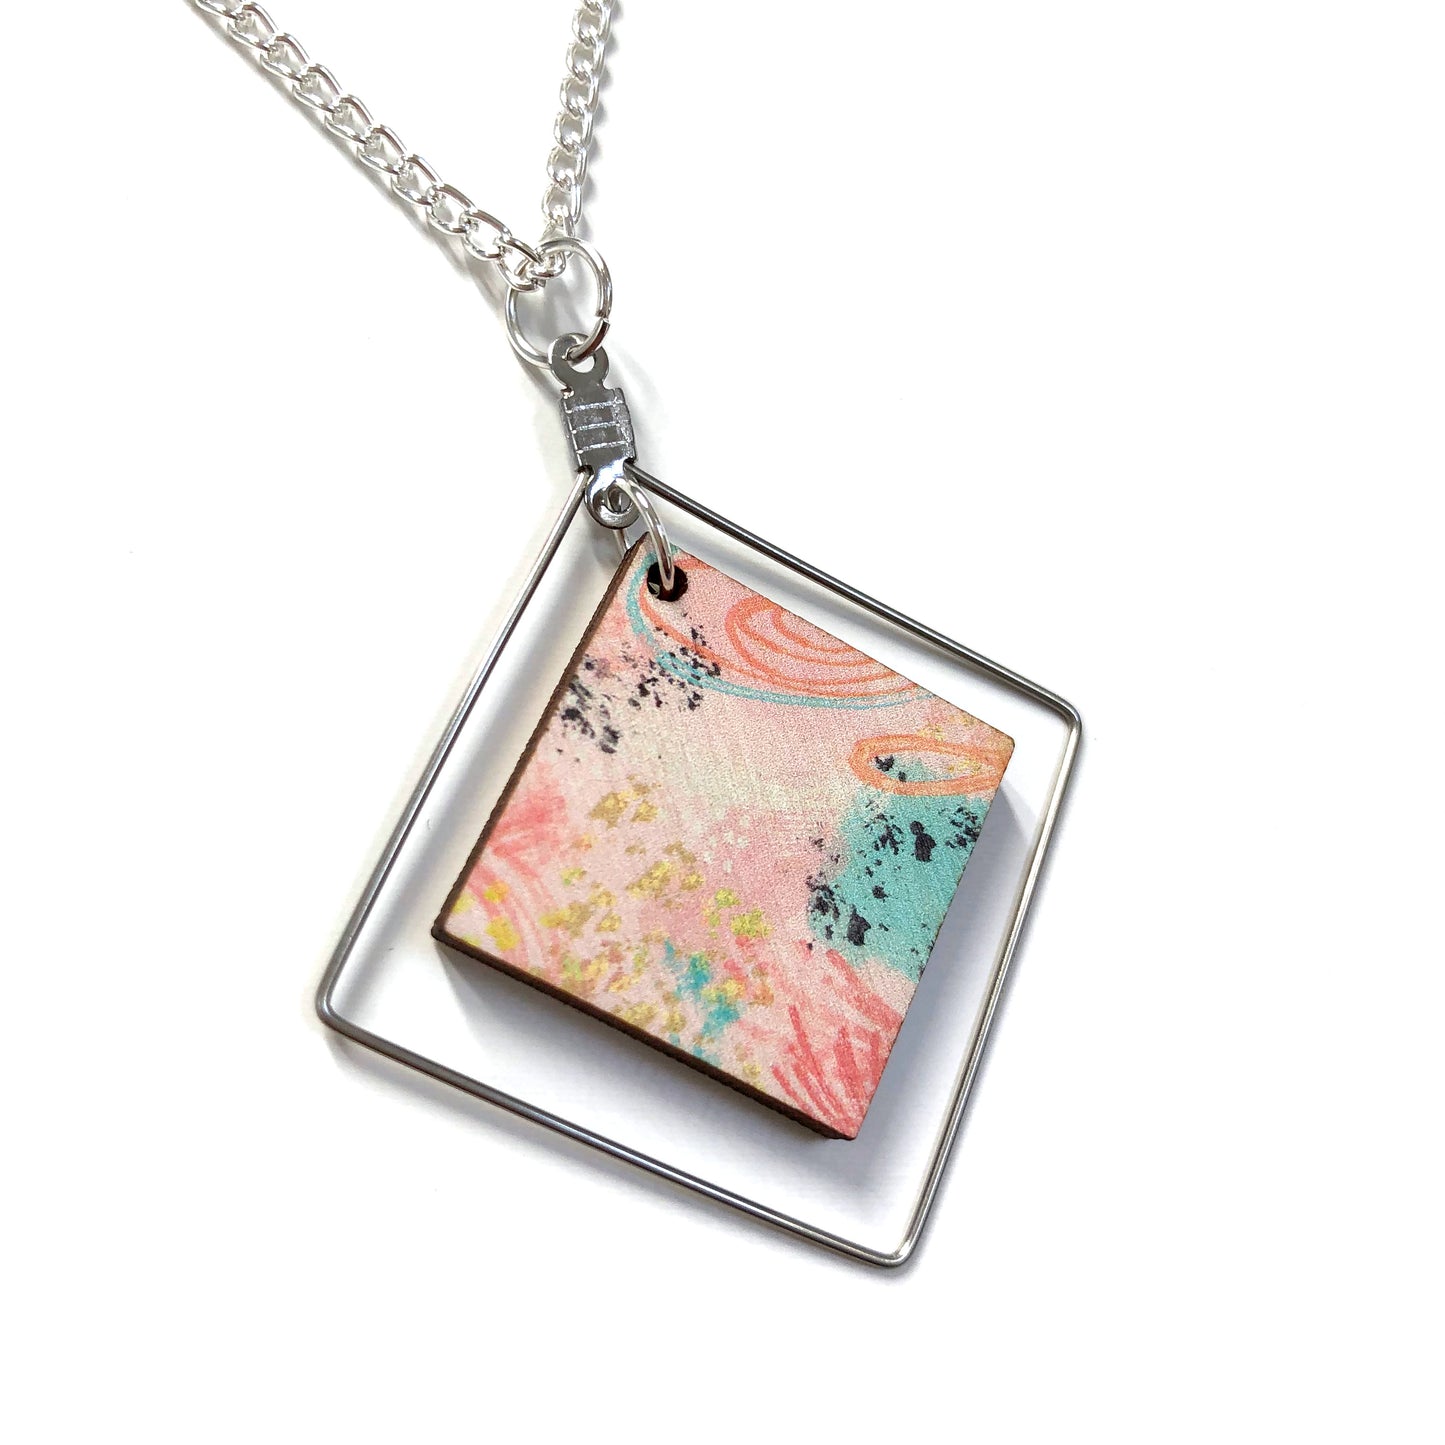 Pink pendant necklace - abstract design